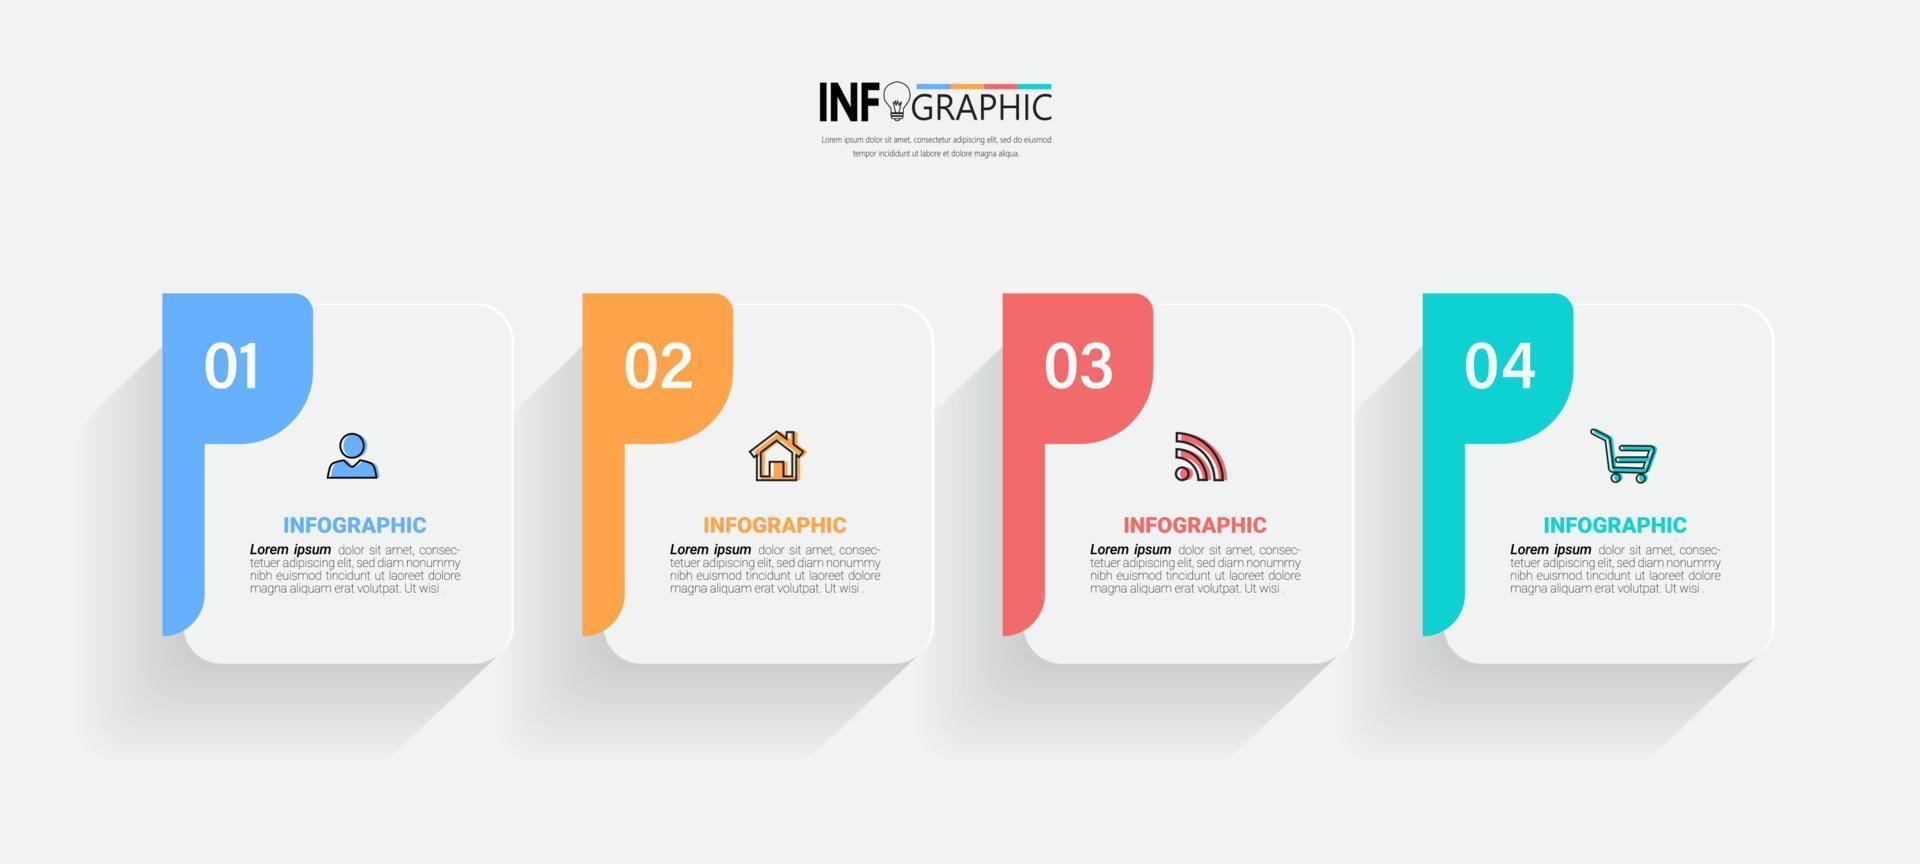 Four steps business infographics template vector